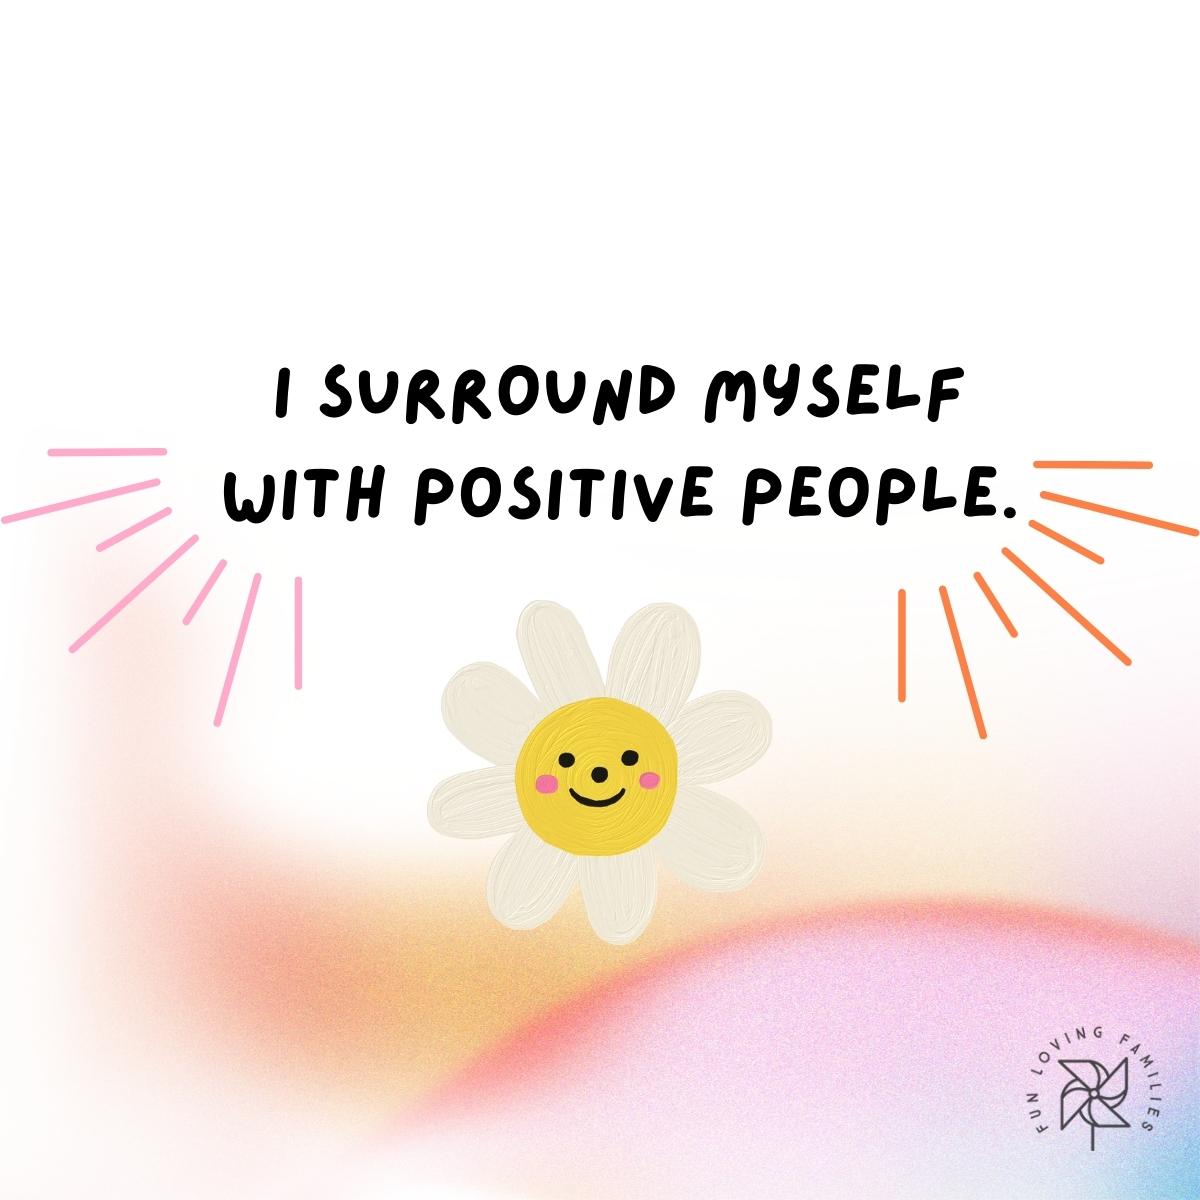 I surround myself with positive people affirmation image